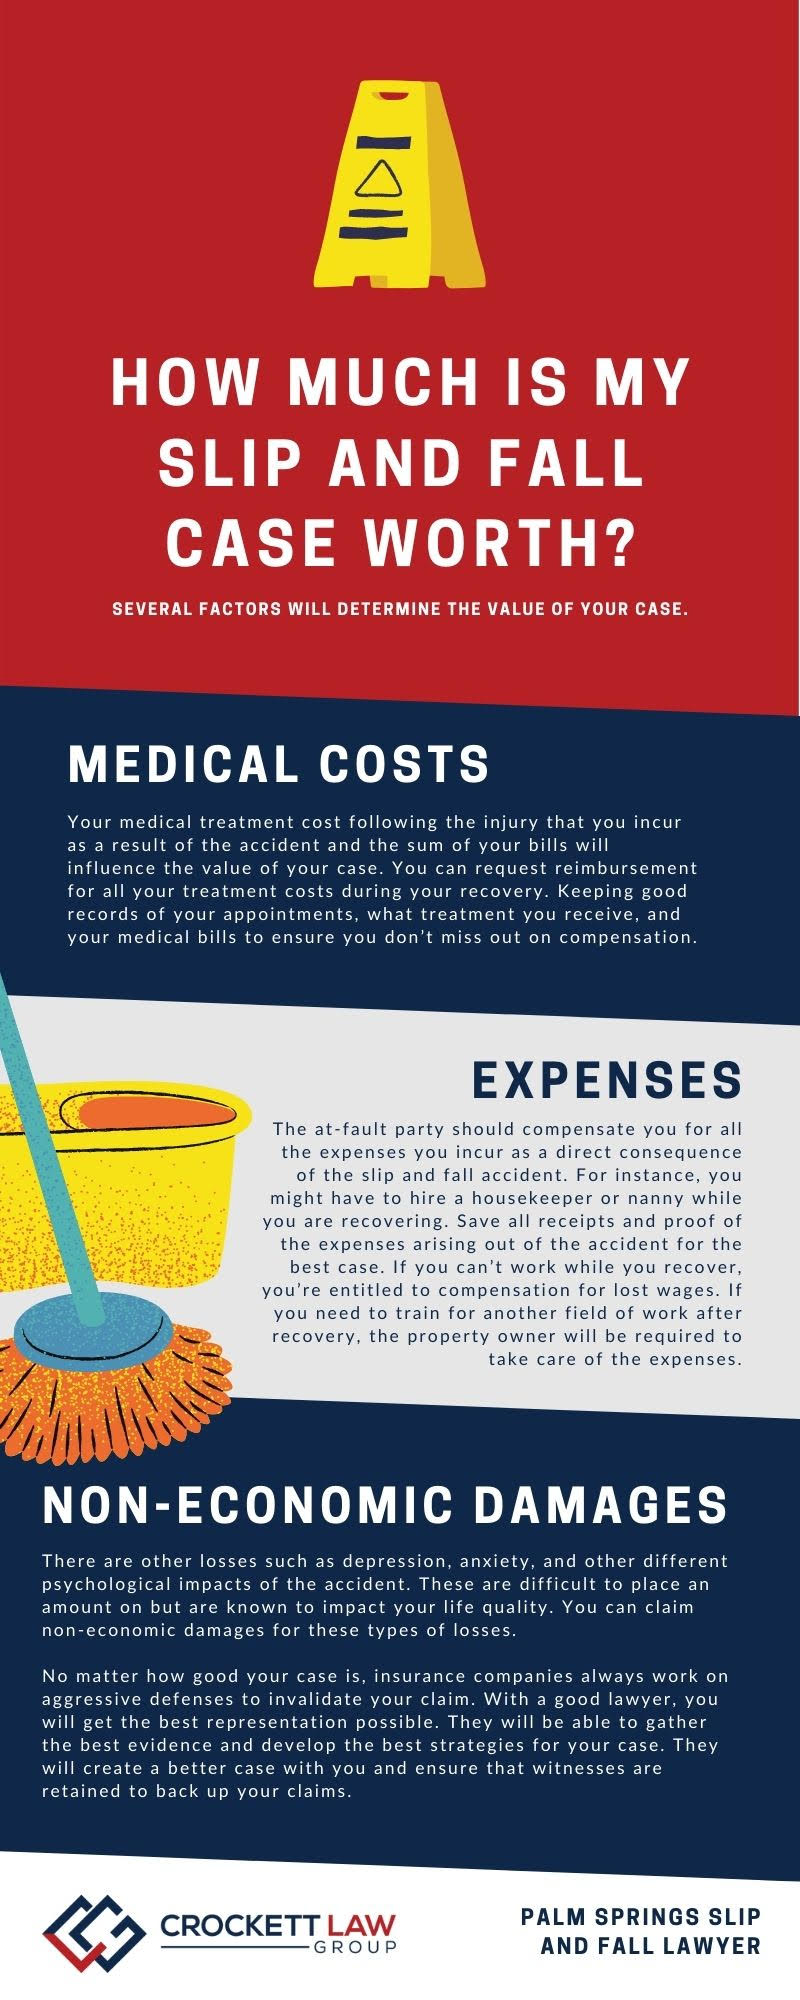 Palm Spring Slip and Fall Accident Lawyer Infographic